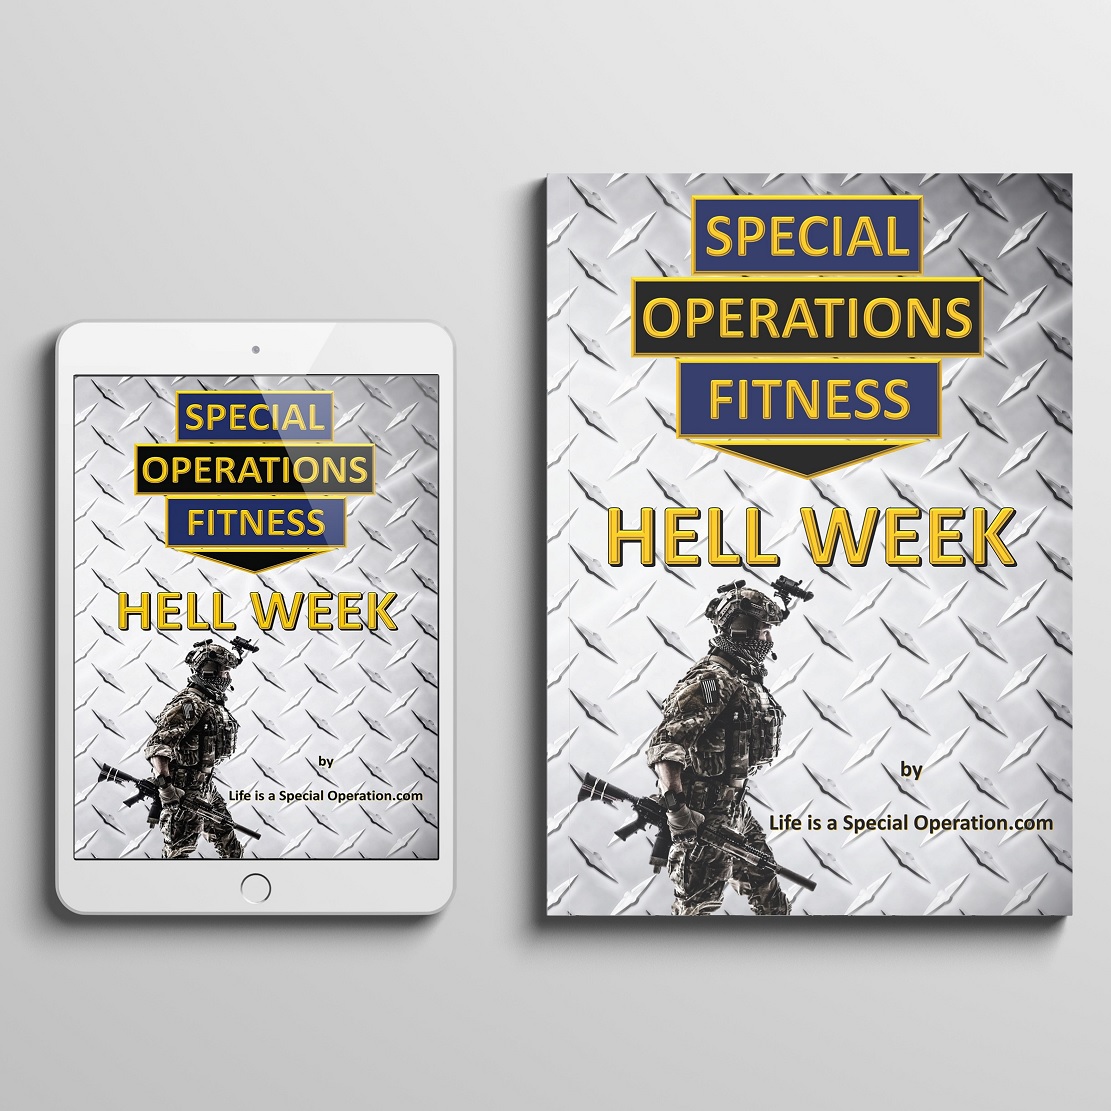 Life is a Special Operation - Are Your Ready For It? The Ultimate 1 Week “Gut Check” See if You Have What It Takes! Designed to Validate Future Members of Special Operations Better to Quit a $20 Program than 1/2 way into a 3-Year Enlistment Nothing to Lose (Except Body Fat) – Money Back Guarantee